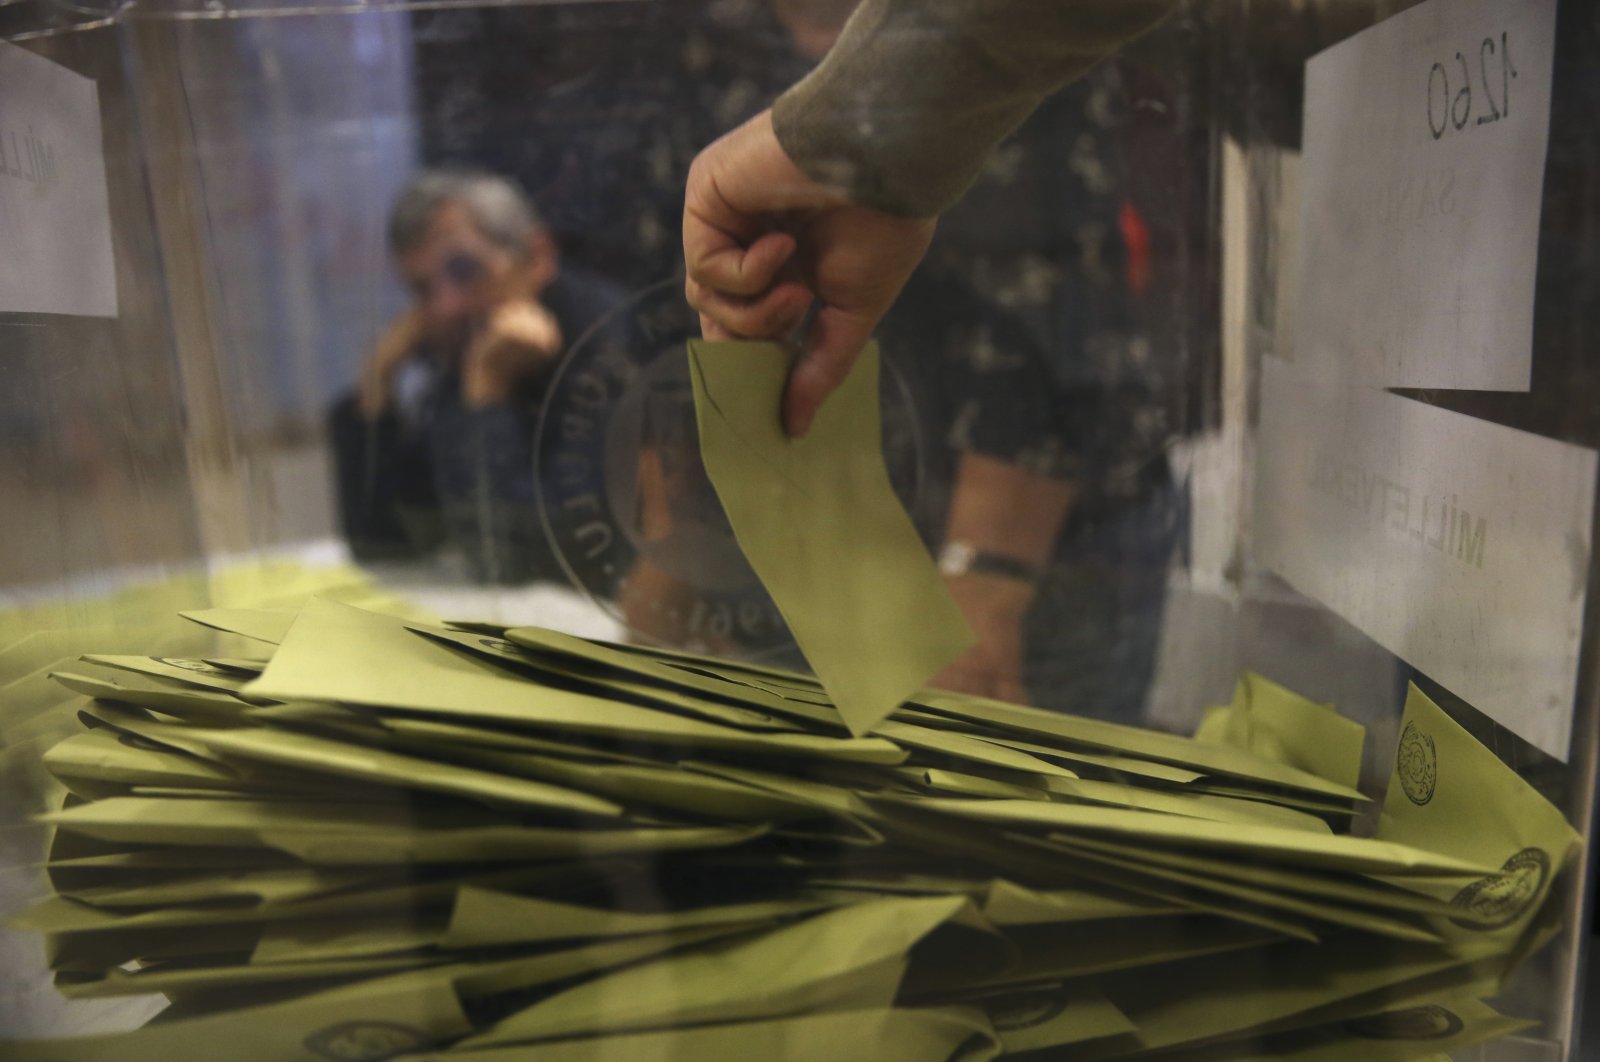 A Turkish election official removes the voting envelopes from a ballot box shortly after the polling stations closed at the end of the election day, in Istanbul, Turkey, Nov. 1, 2015. (AP File Photo)